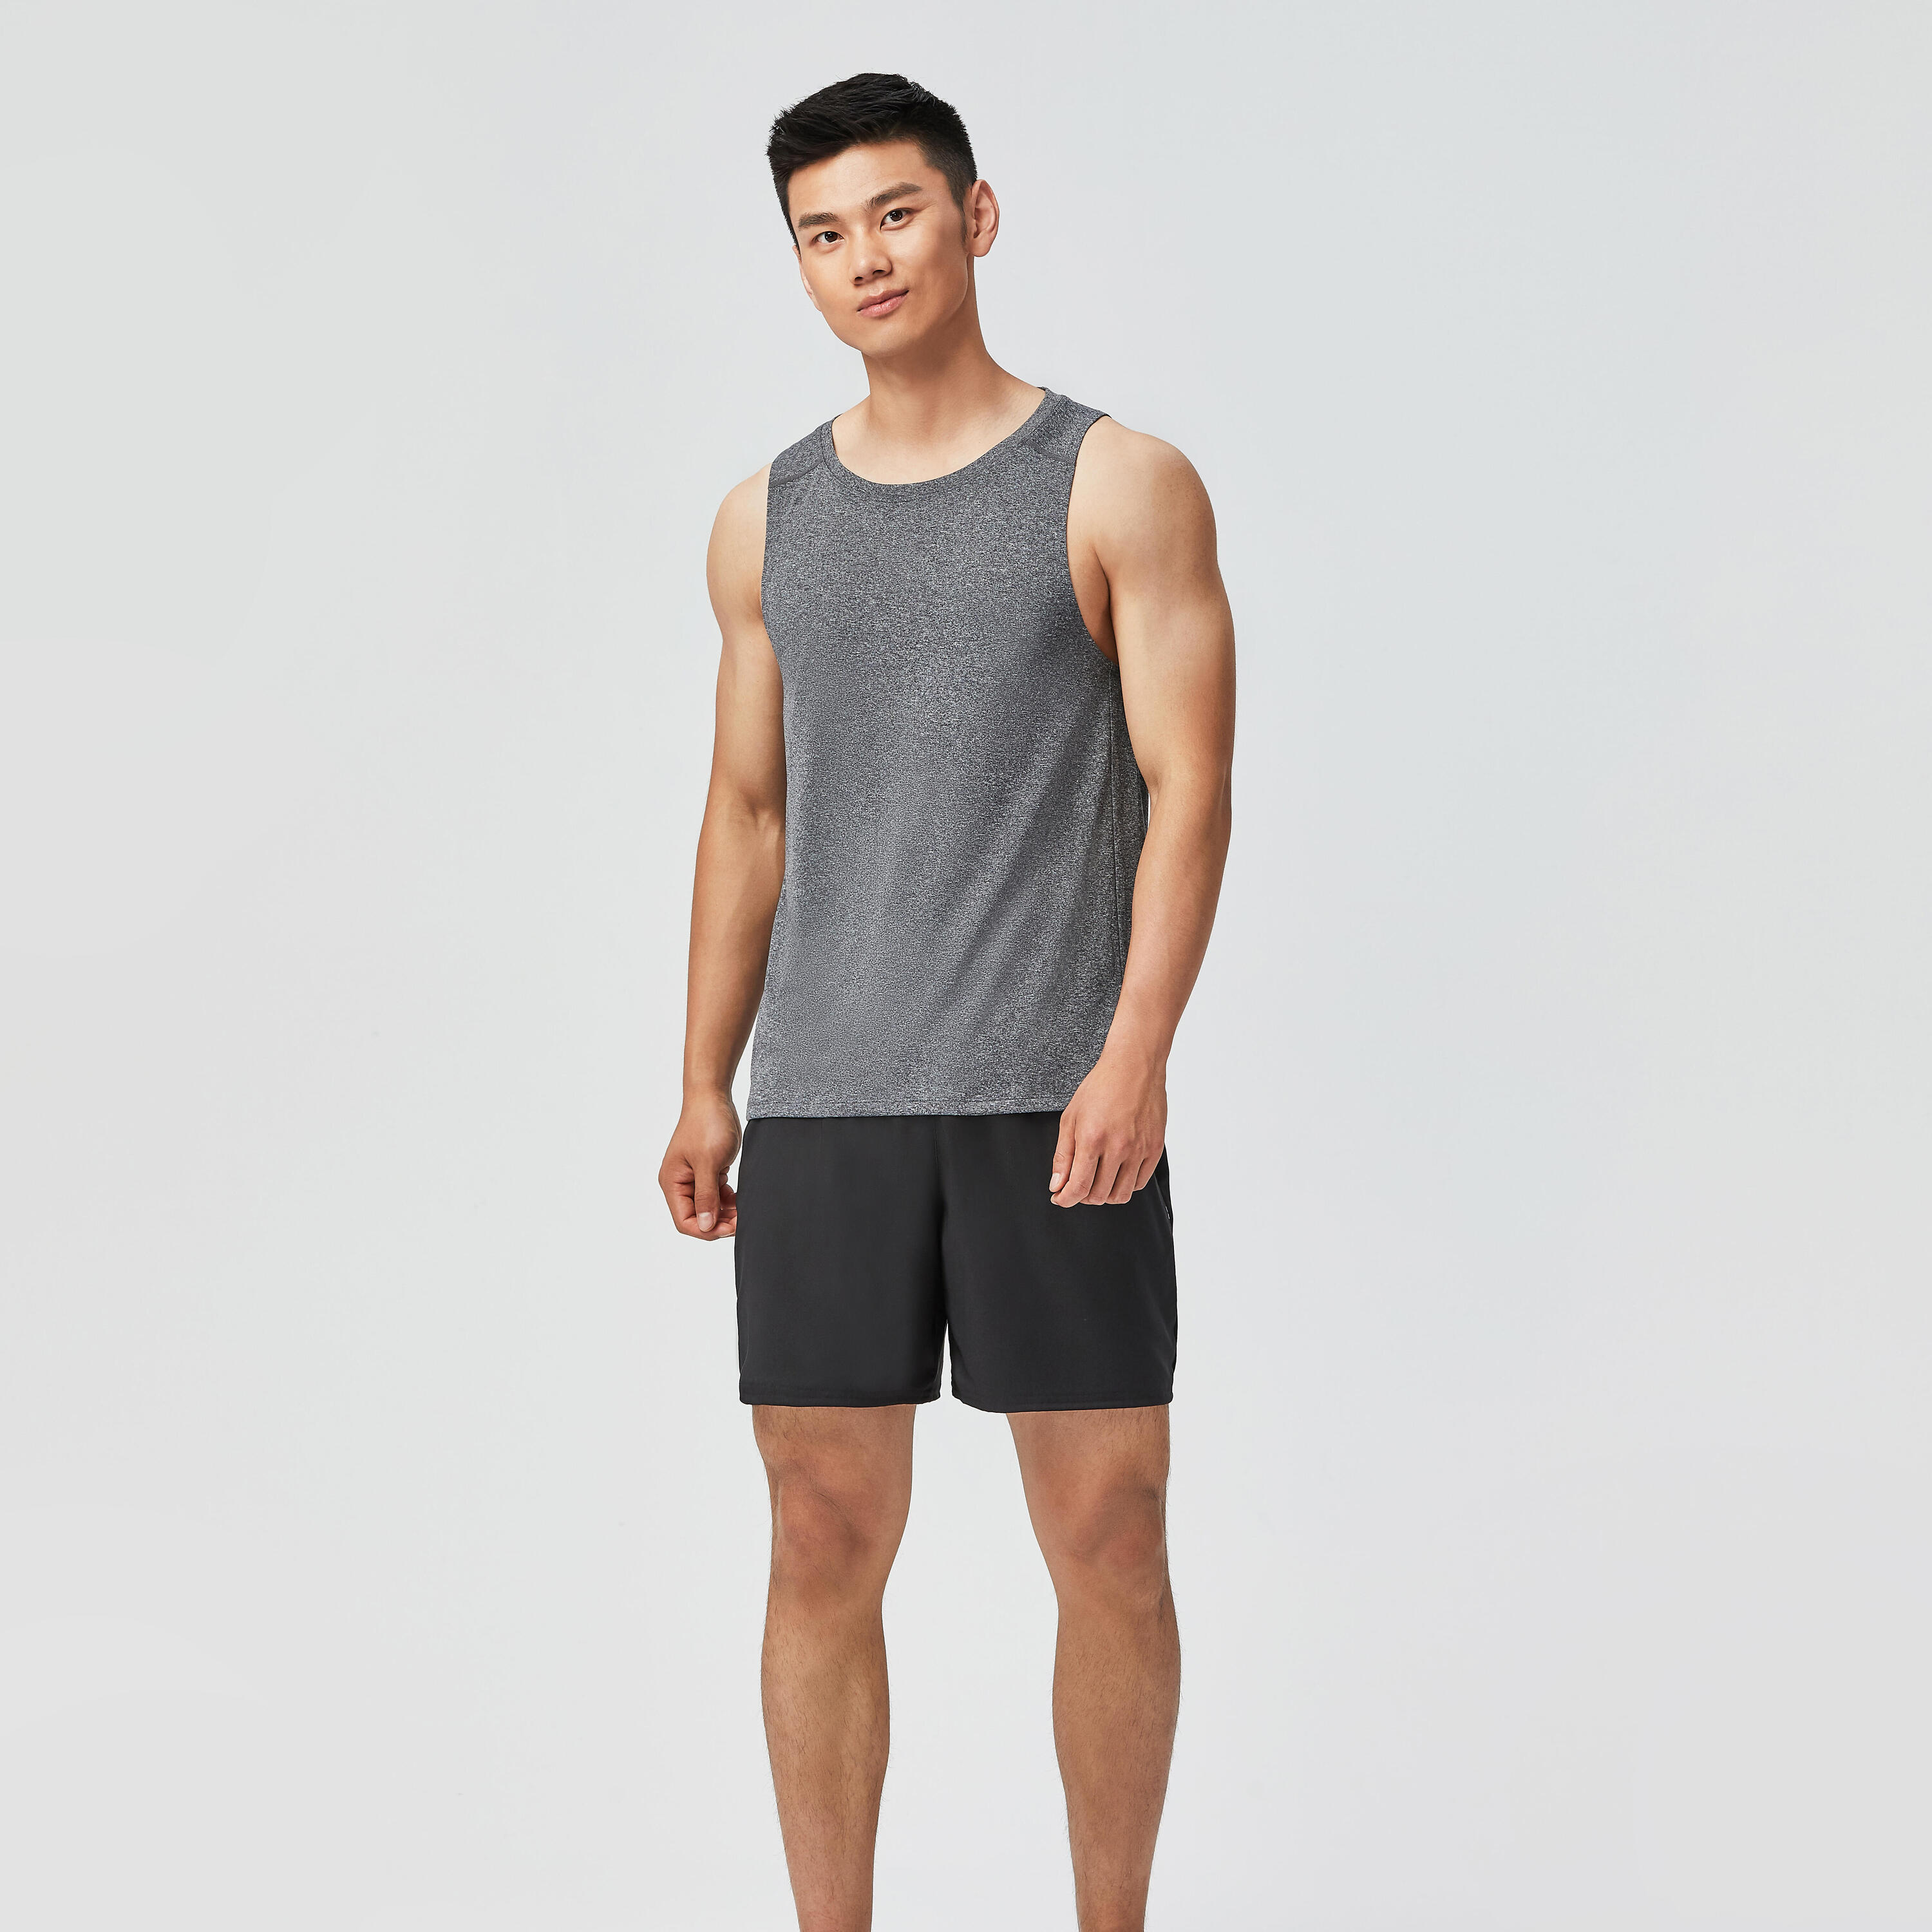 Men's Breathable Crew Neck Essential Collection Fitness Tank Top - Grey 5/6